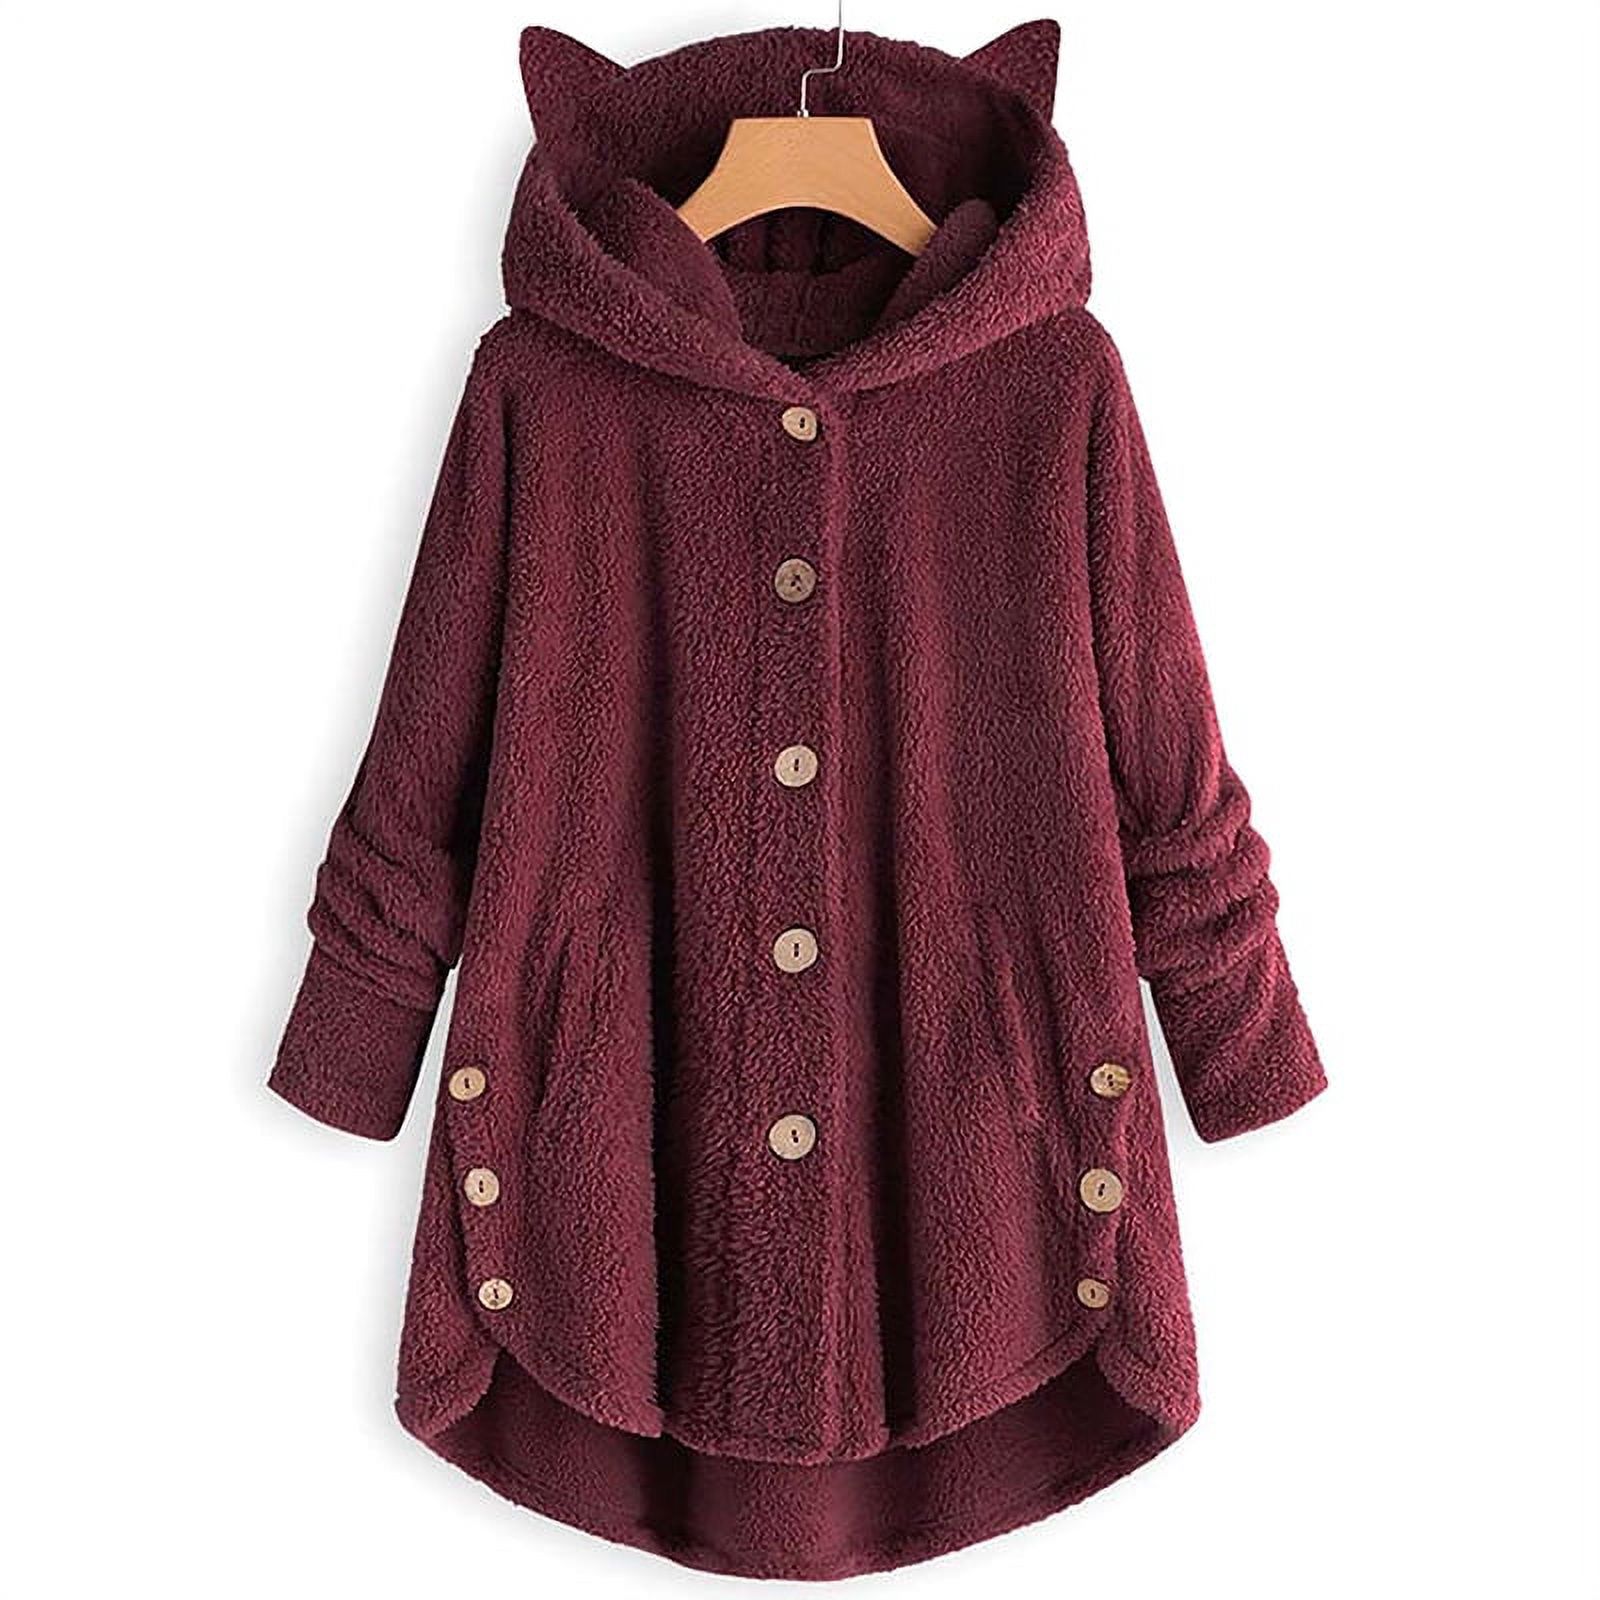 Female Faux Fur Coat Winter Warm Shearling Shaggy Jackets Button Tops for Women with Pockets - image 1 of 3